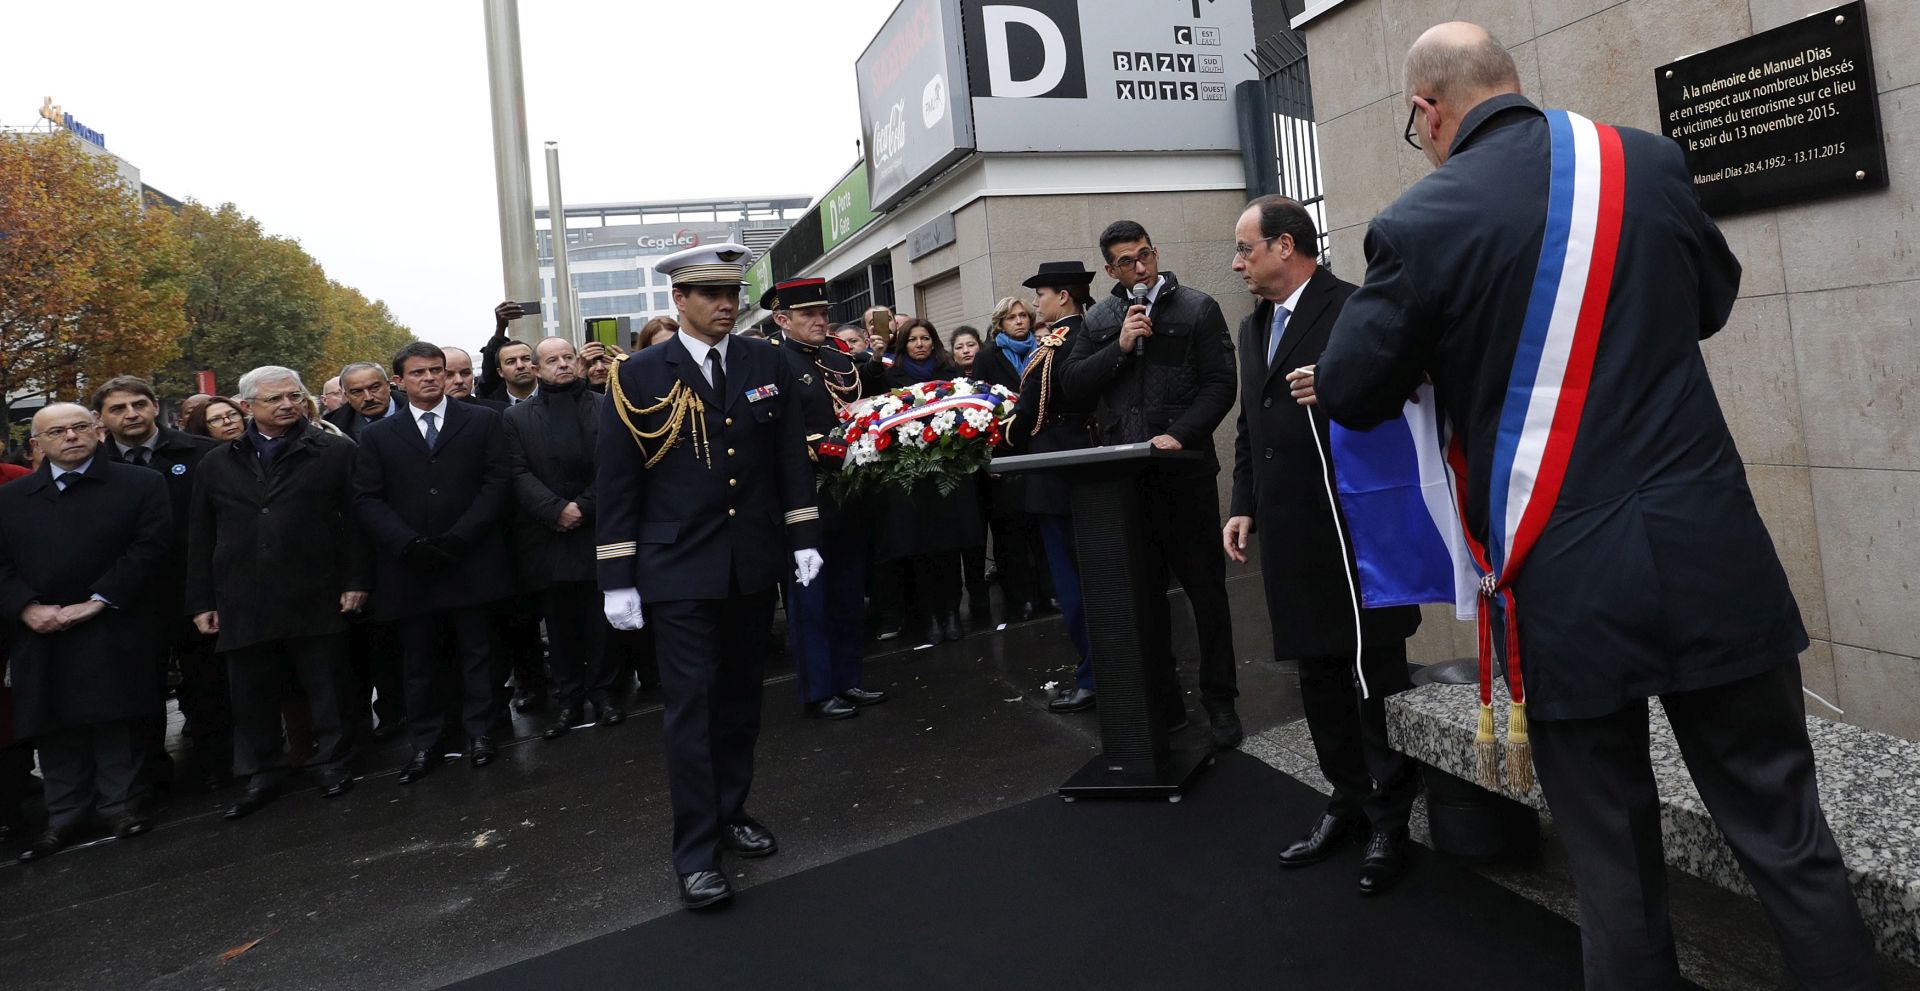 epa05629450 French President Francois Hollande and Saint-Denis Mayor Didier Paillard unveil a commemorative plaque outside the Stade de France stadium, in Saint-Denis, near Paris, France, during a ceremony marking the one year anniversary of the Paris attacks of November 2015 in which 130 people were killed, in Paris, France, 13 November 2016. The President is due to visit each attack site to unveil a commemorative plaque.  EPA/PHILIPPE WOJAZER/POOL  EPA/PHILIPPE WOJAZER/POOL MAXPPP OUT